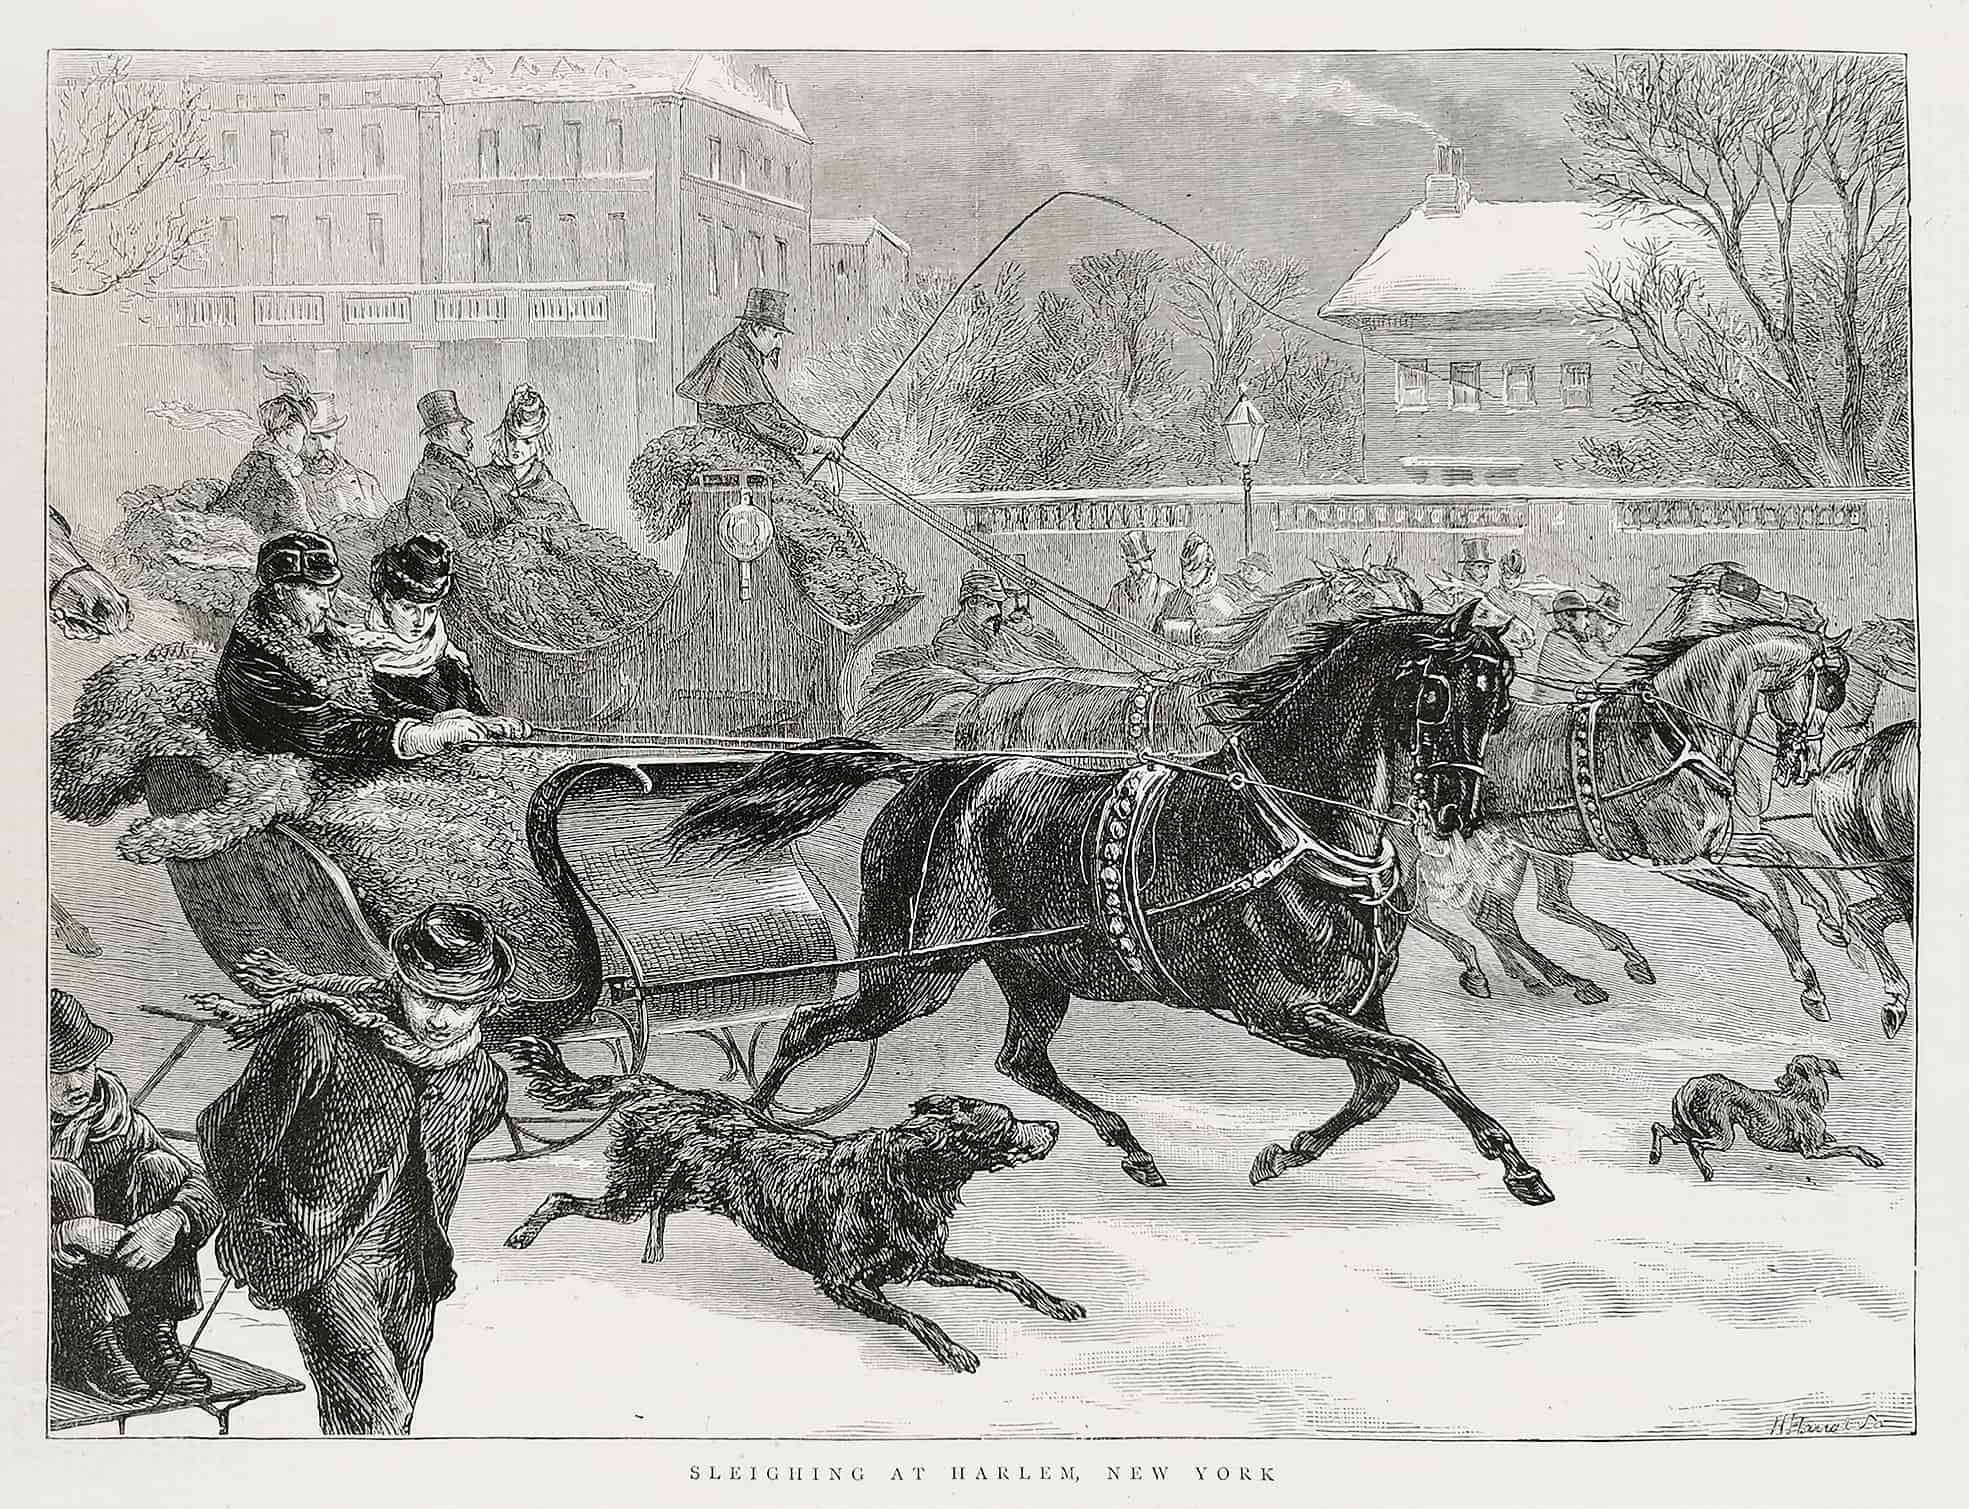 Sleighing at Harlem, New York. - Antique View from 1873